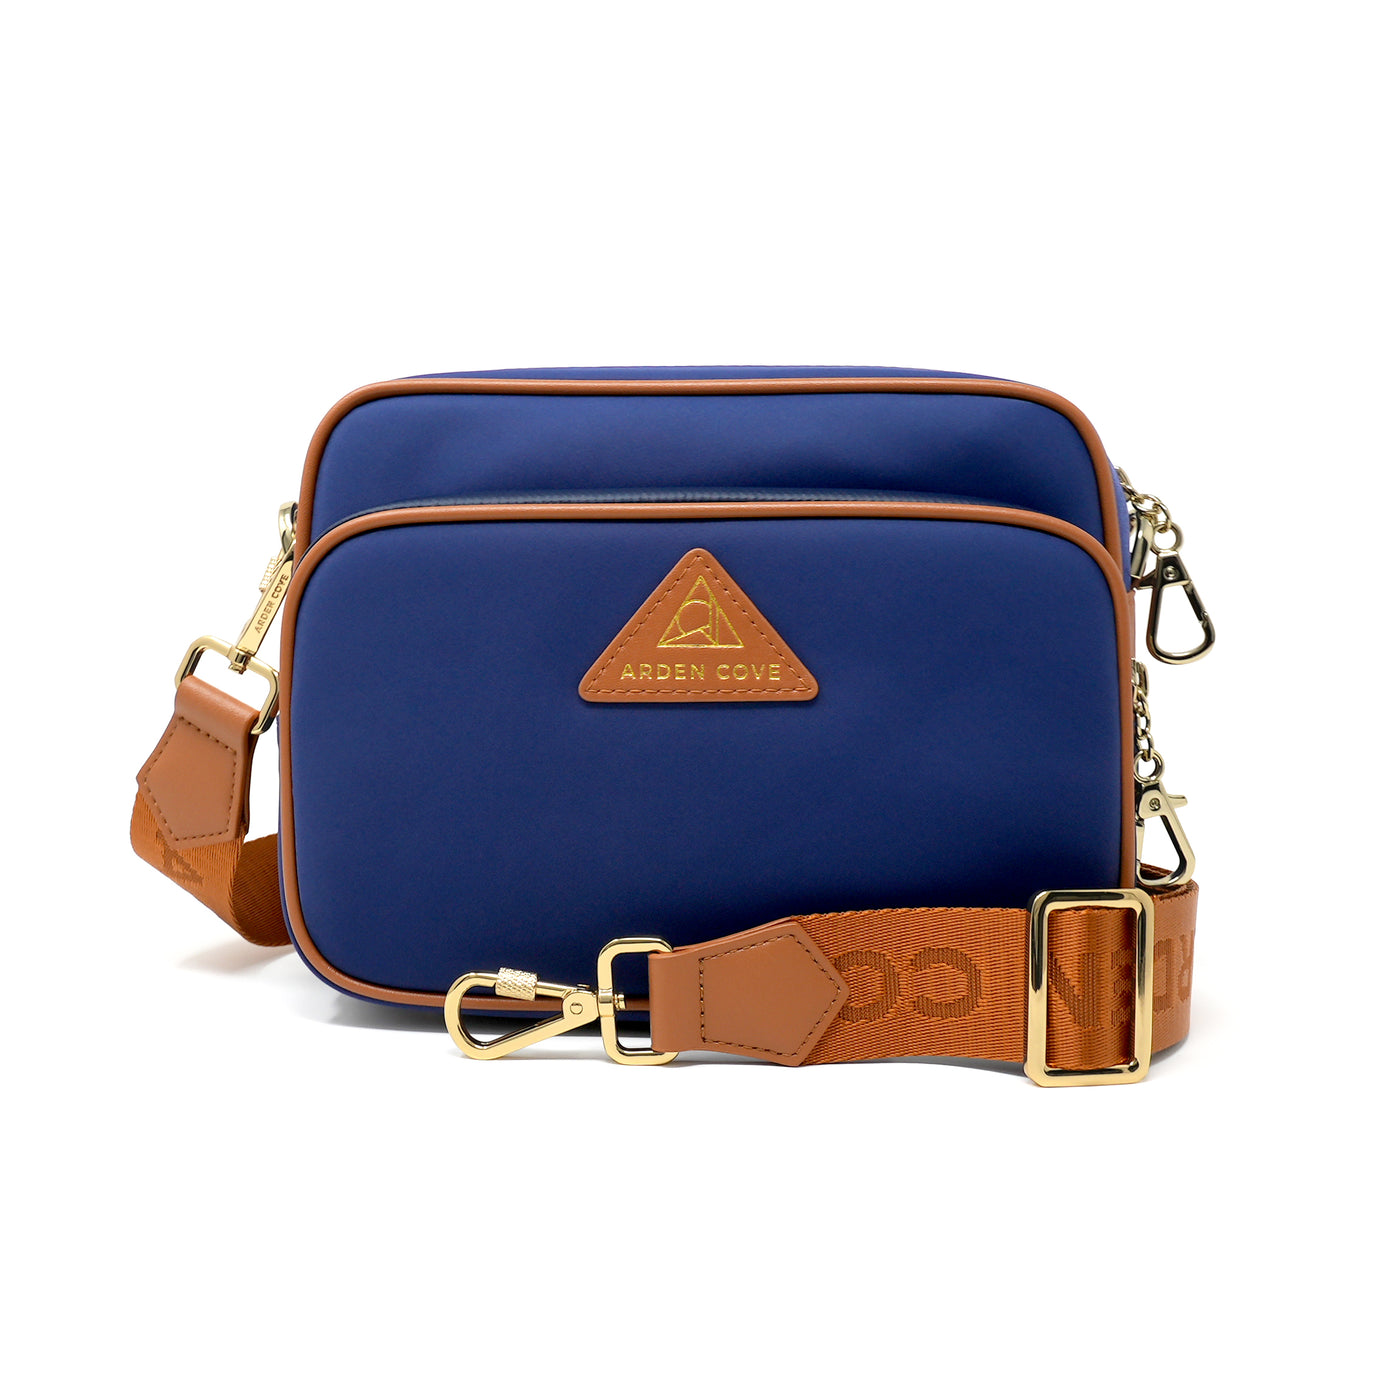 Anti-theft Water-resistant Travel Crossbody - Crissy Full Crossbody in Navy Gold with nylon jacquard & locking clasps straps - front view - Arden Cove